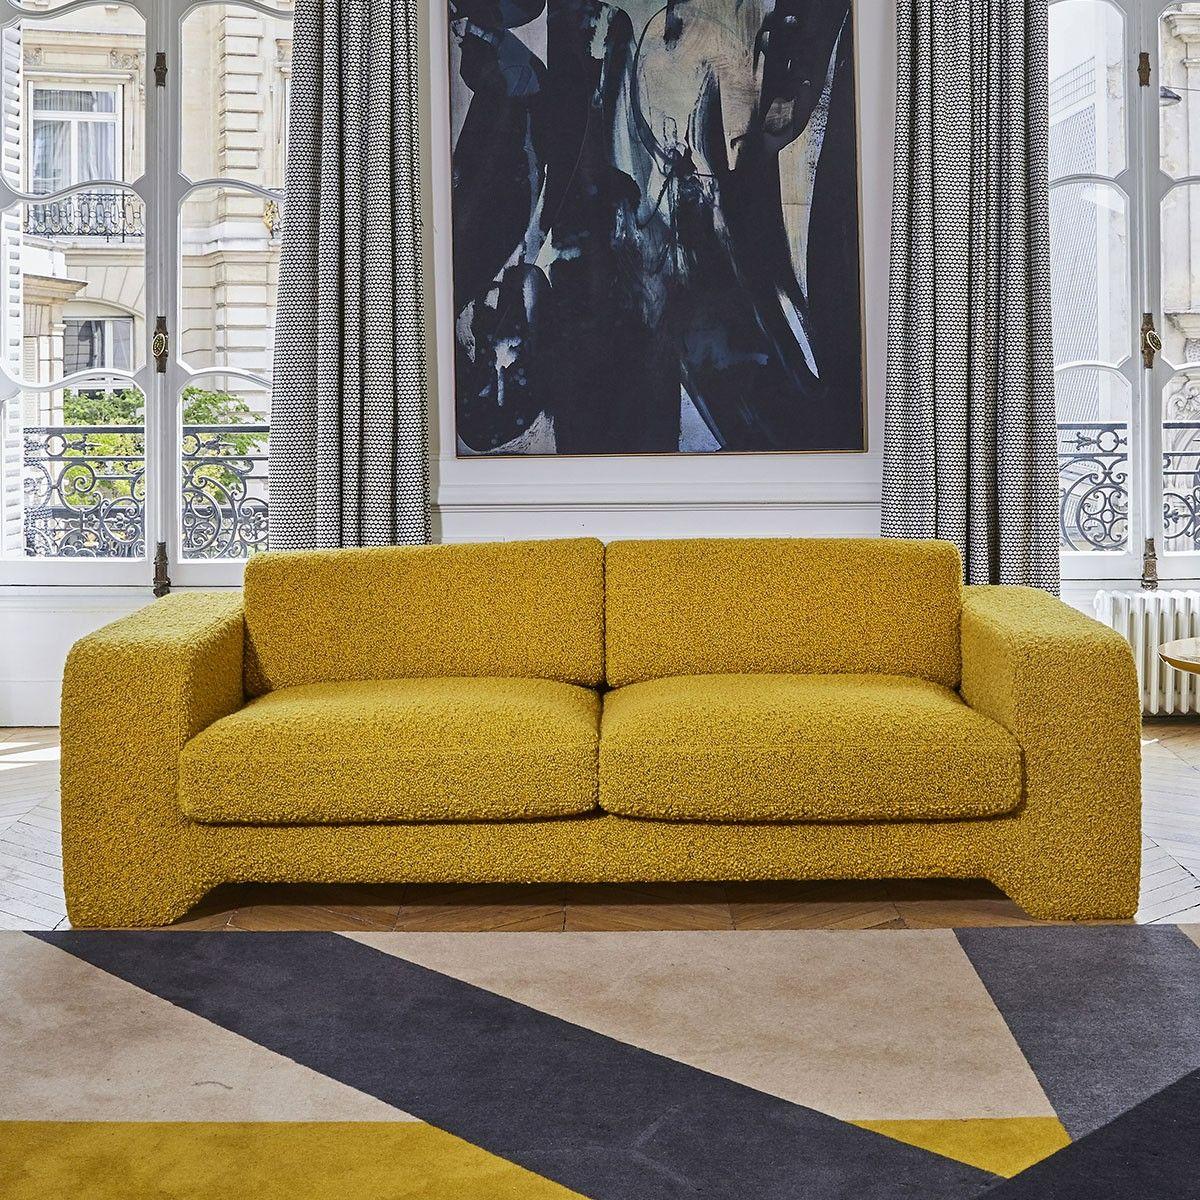 Popus Editions Giovanna 4 seater sofa in Orange-Red Como Velvet Upholstery

Giovanna is a sofa with a strong profile. A sober, plush line, with this famous detail that changes everything, so as not to forget its strength of character and this